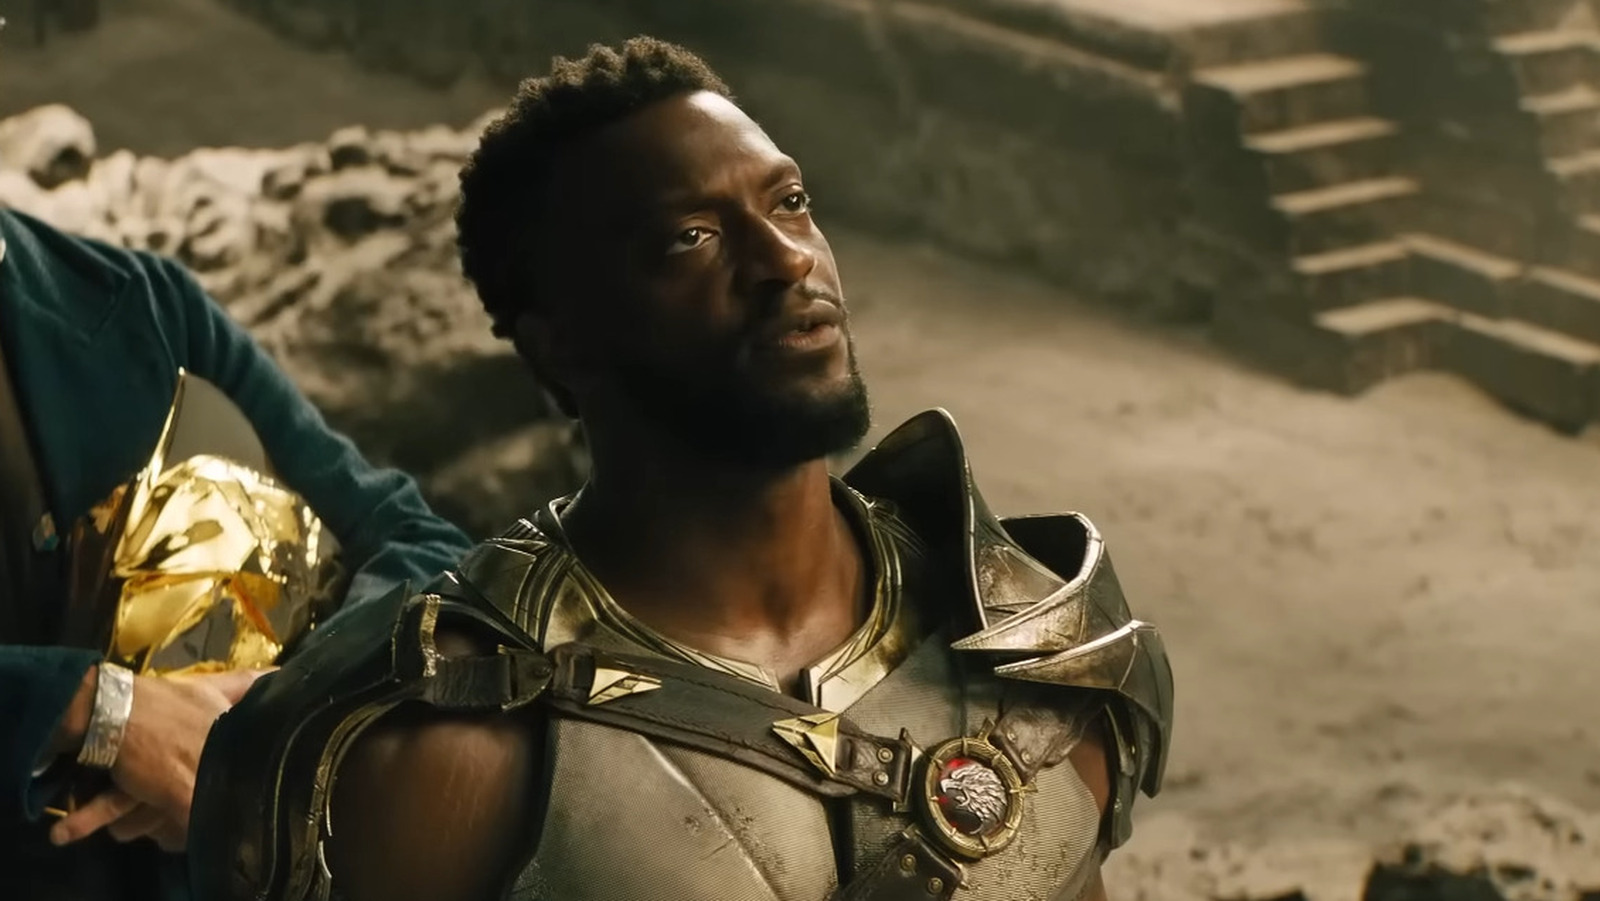 Black Adam’s Aldis Hodge Trains With Dwayne Johnson And Develops Hawkman’s Moves [Exclusive Interview]